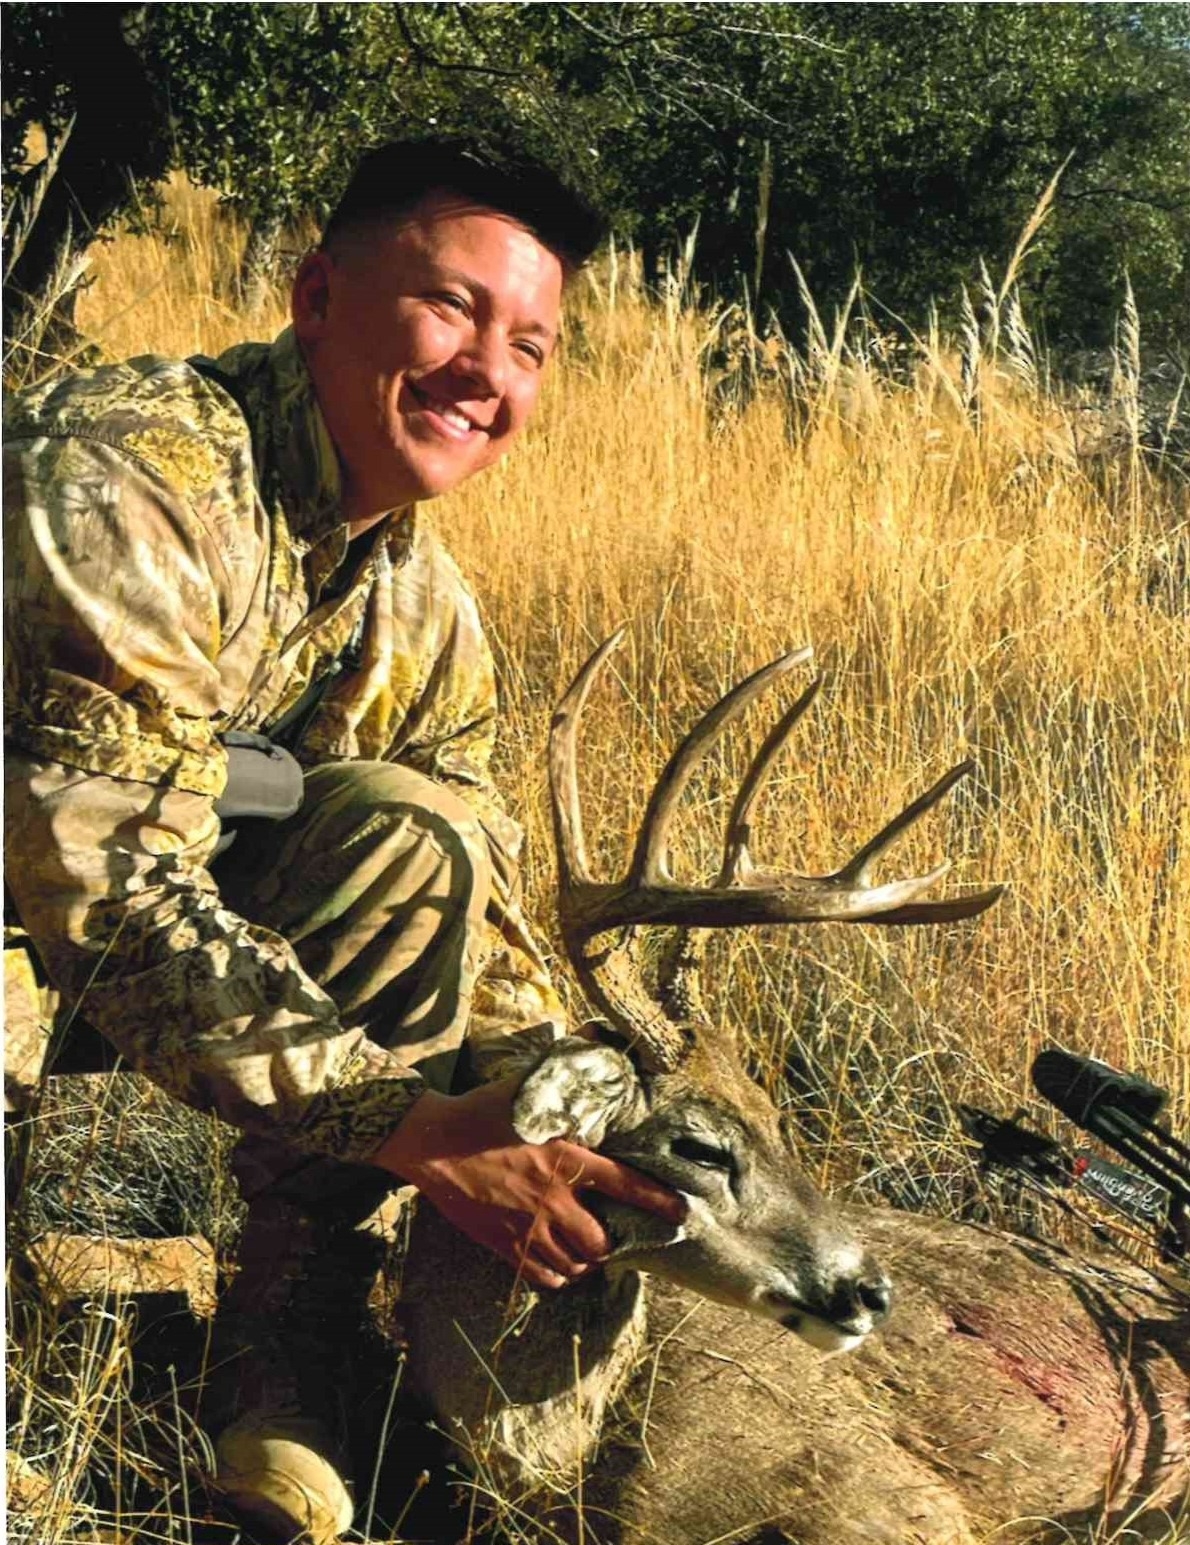 
Trophy of the Week - Gabriel Sheley's 2022 Typical Coues' Deer